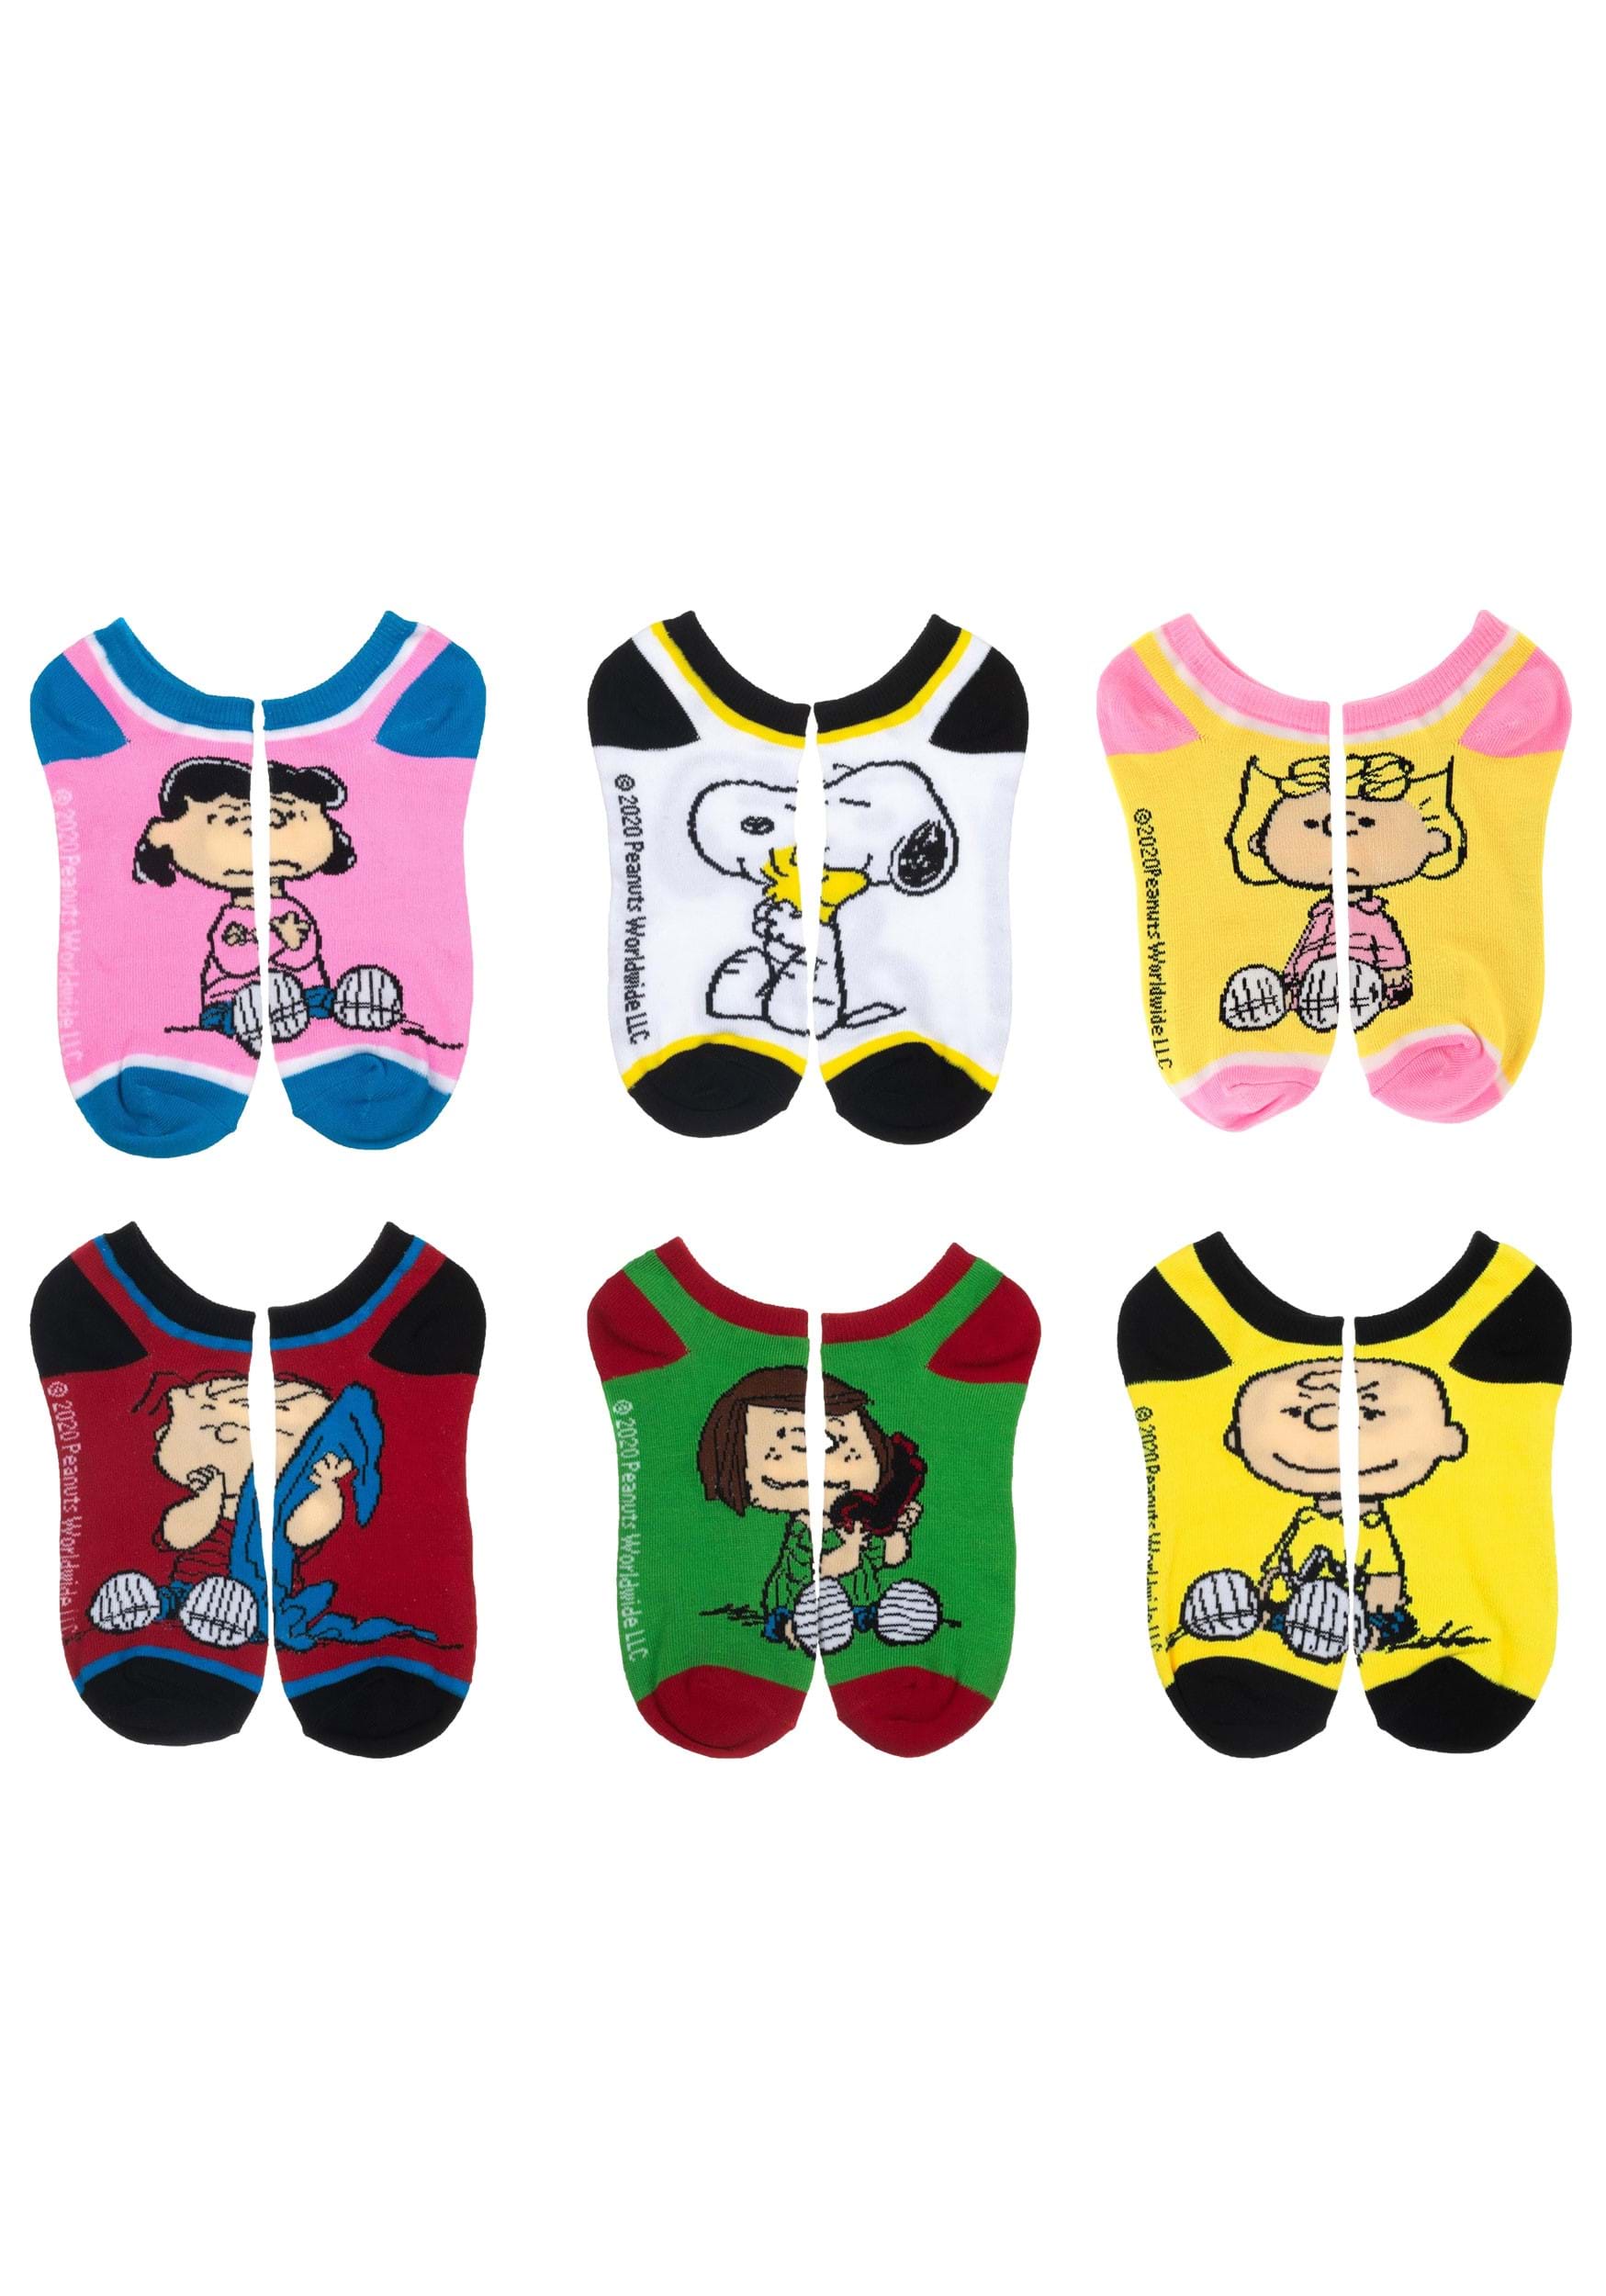 Peanuts Characters 6 Pack Ankle Socks